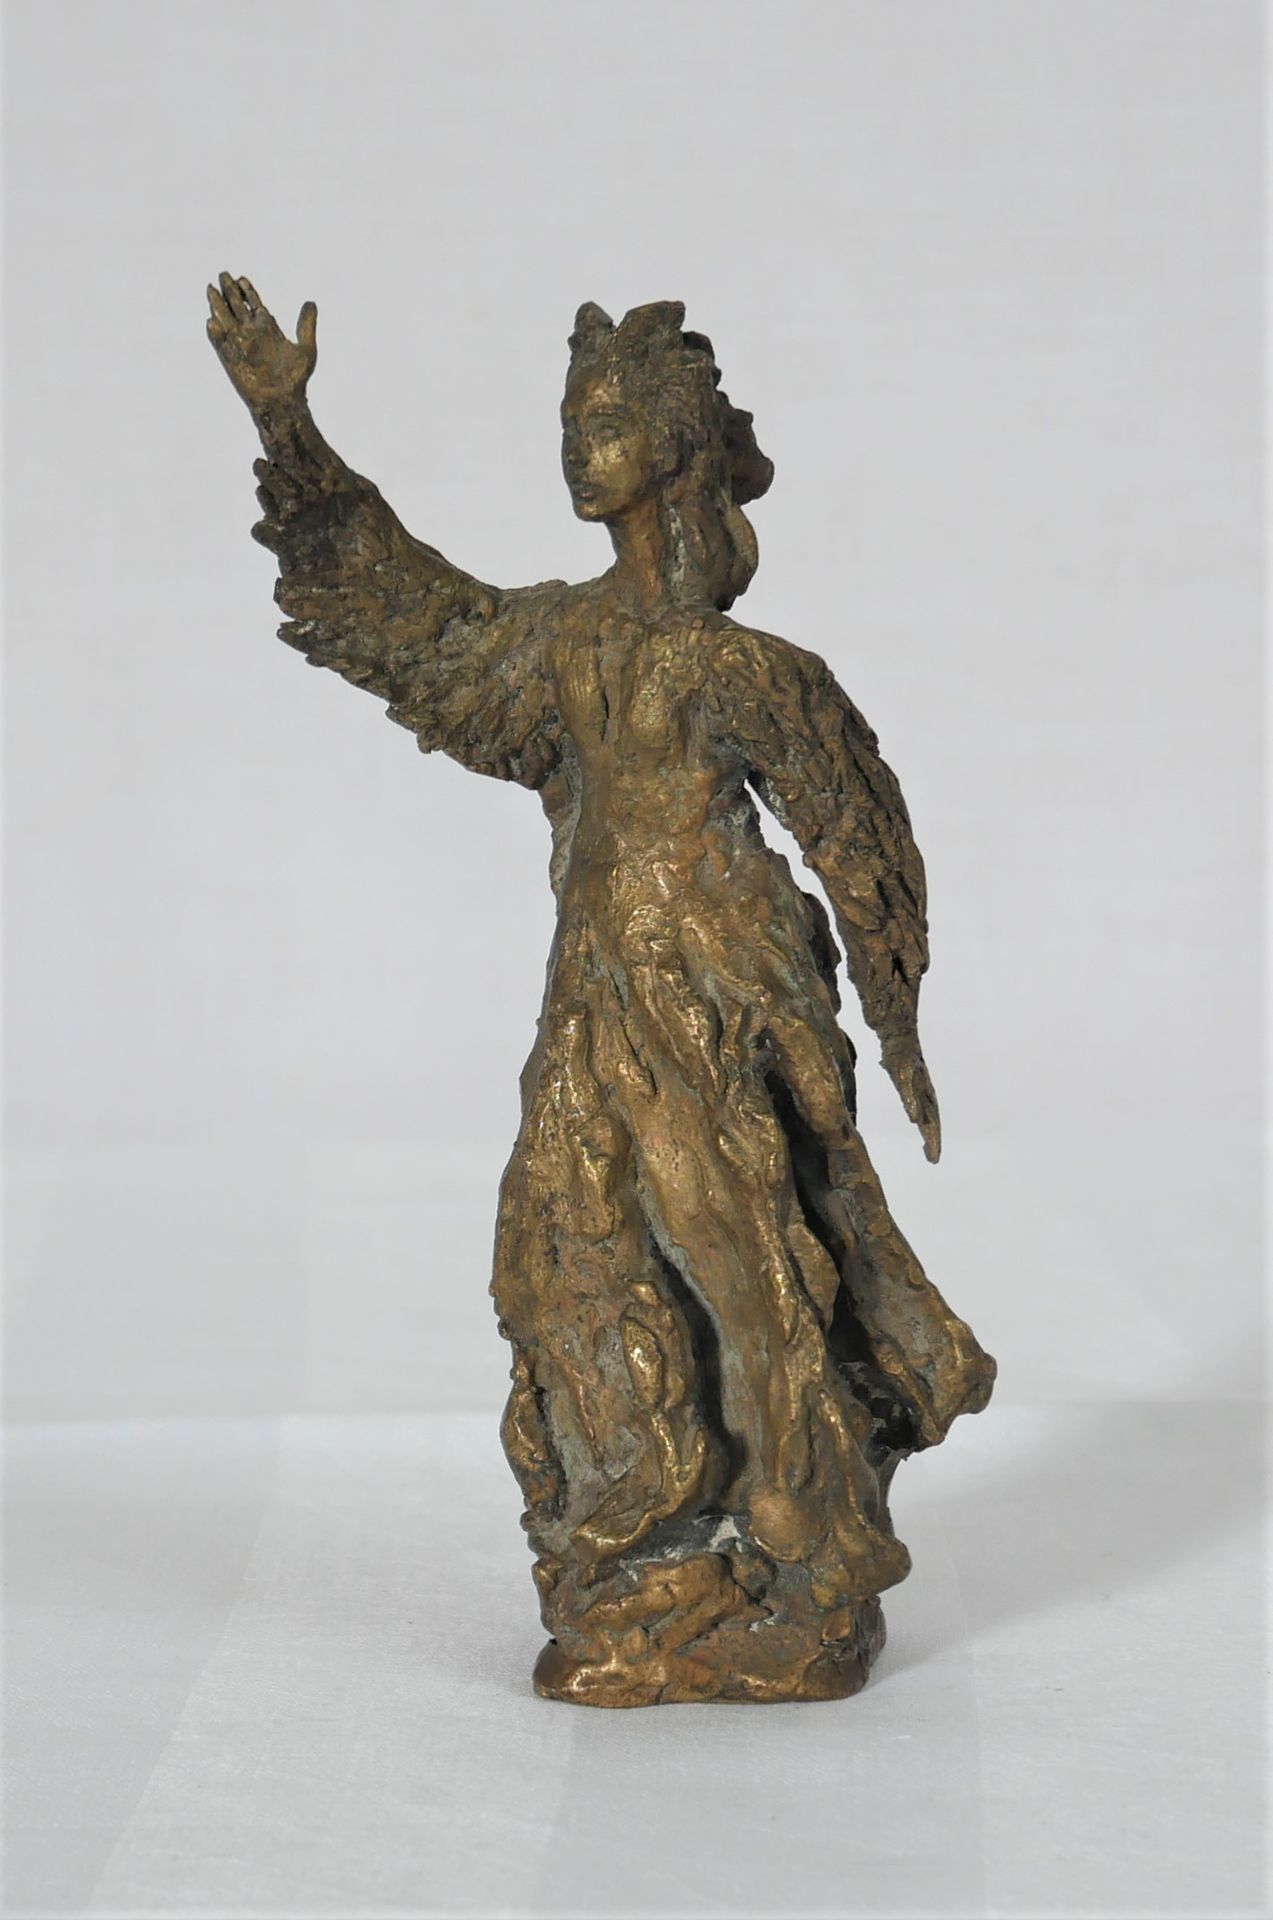 Null Modern school

Woman standing with her right arm raised

Bronze sculpture, &hellip;